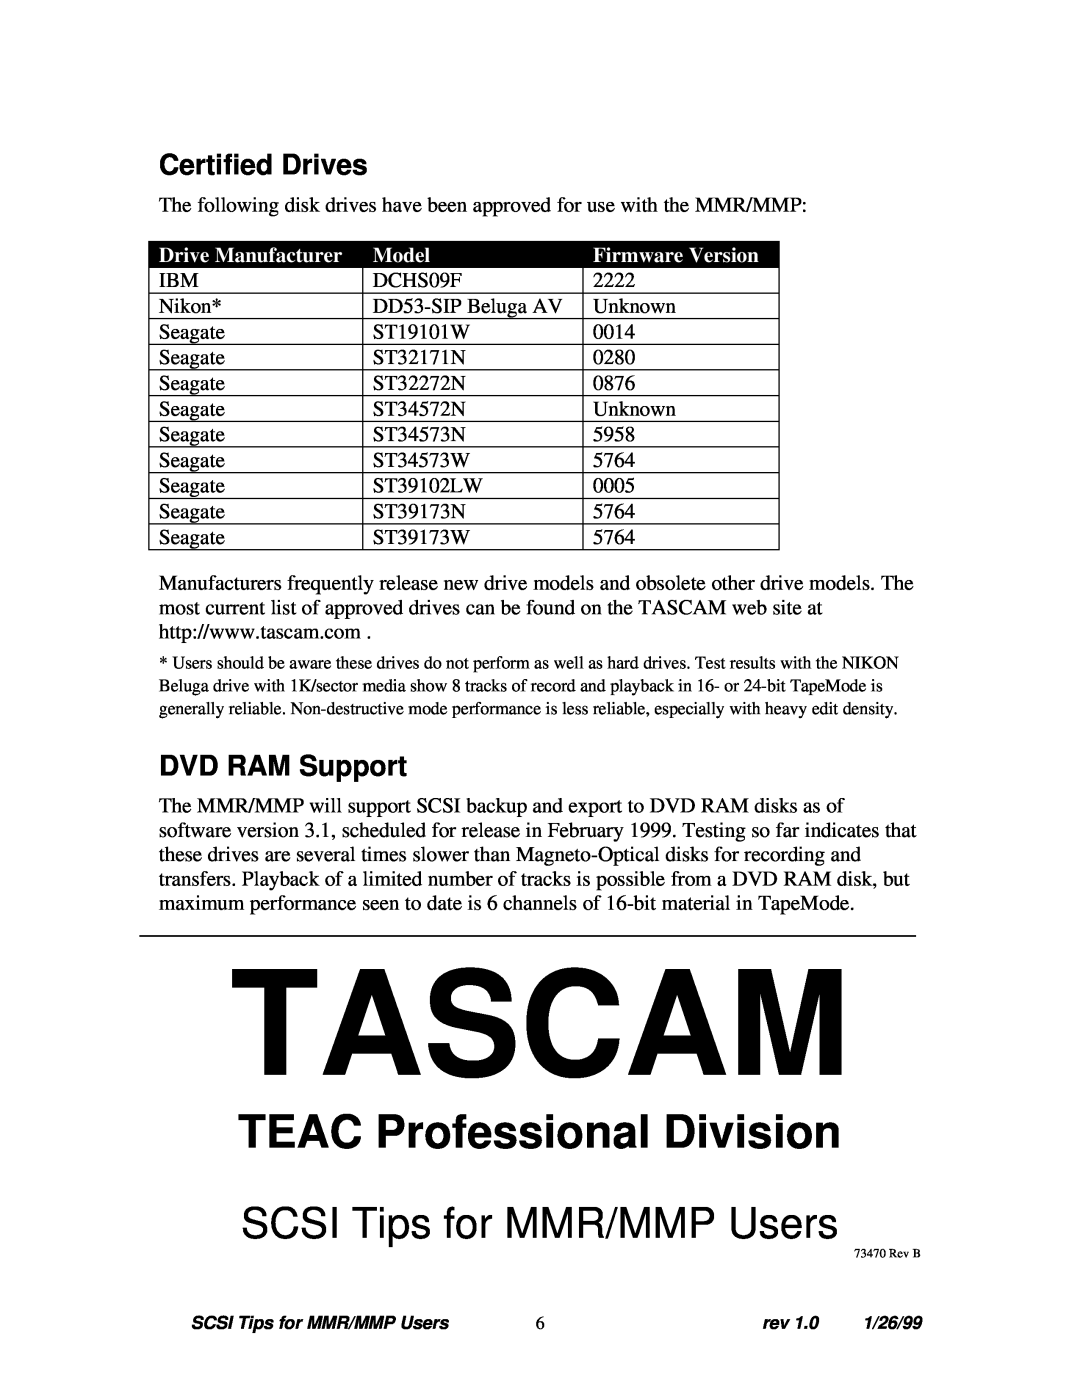 Tascam MMP-16 Certified Drives, DVD RAM Support, Tascam, TEAC Professional Division, SCSI Tips for MMR/MMP Users, Model 